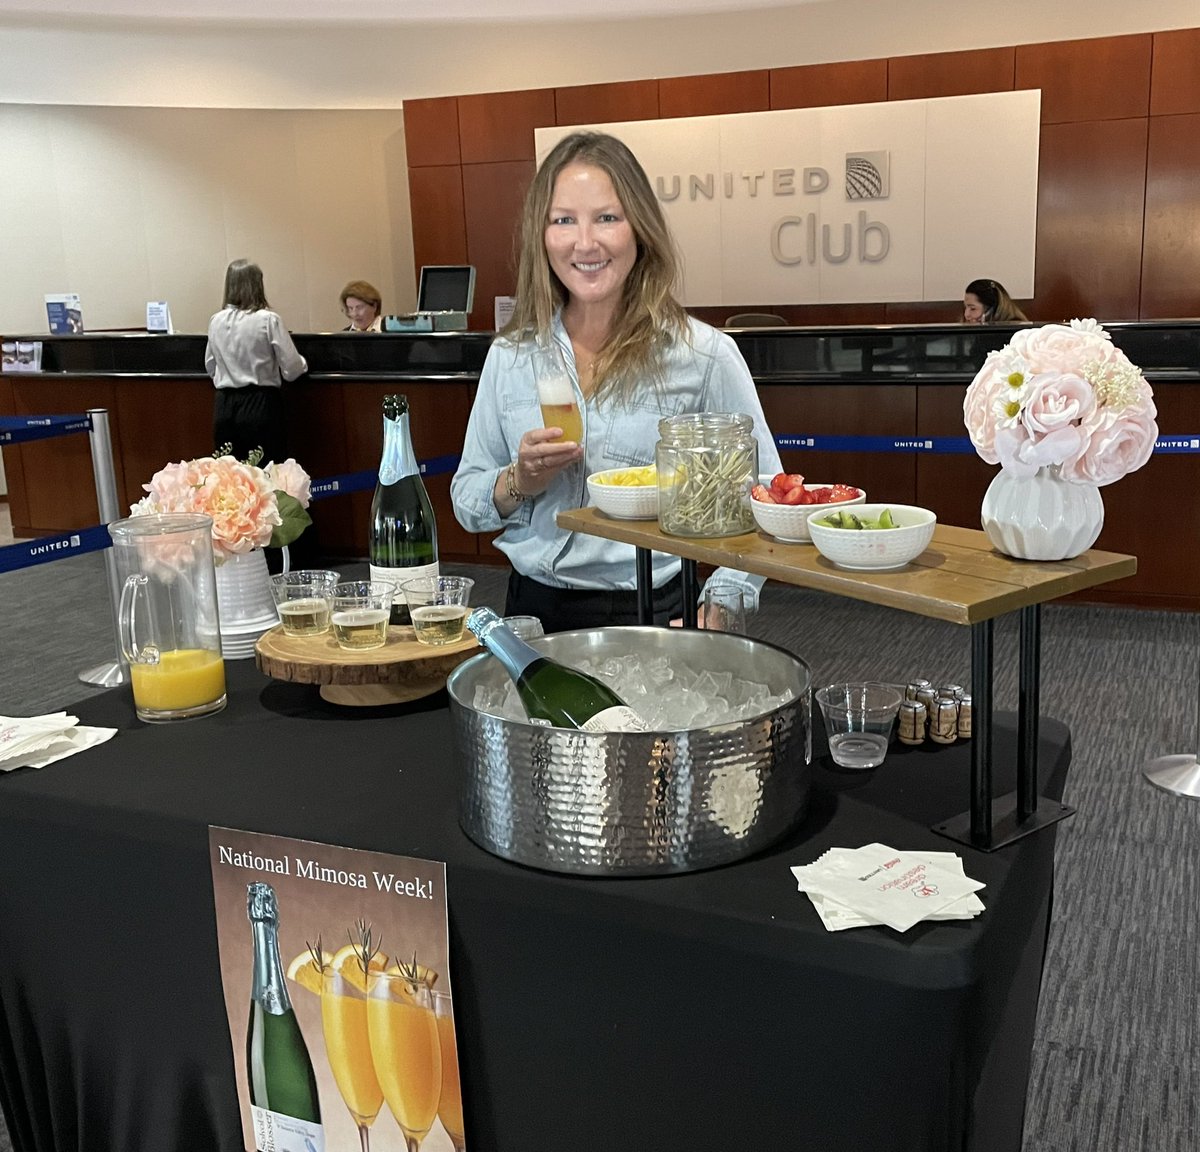 DEN United Club - start with Sokol Blosser sparkling wine when making a light, fizzy Mimosa. Stop by the Club and enjoy a refreshing one. @weareunited @Tobyatunited @jacquikey @KevinMortimer29 @jwartner8 @raeindenver #goodleadstheway